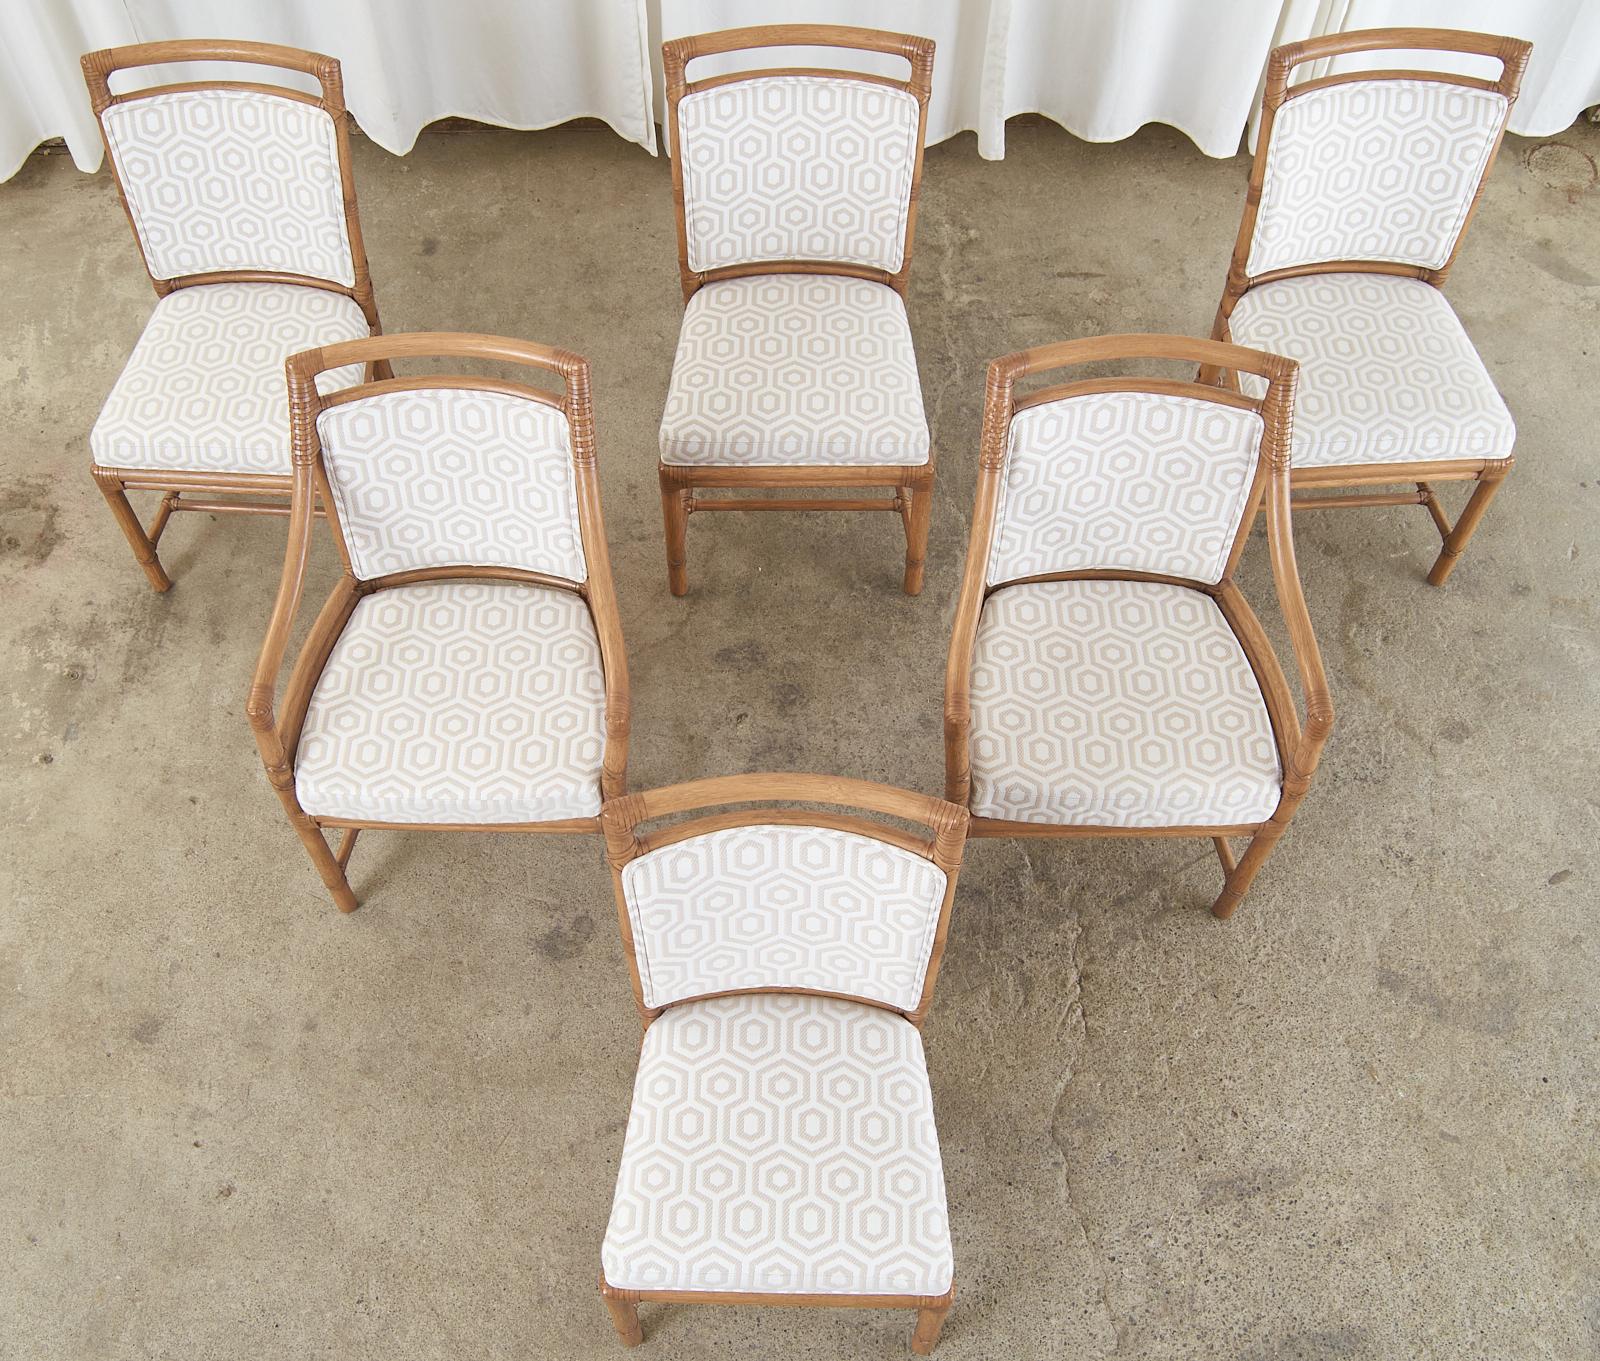 Spectacular set of six McGuire organic modern rattan dining chairs consisting of four side chairs and two host armchairs measuring 24 inches wide. The iconic target chair was designed by Elinor McGuire and is still in production today. The rattan